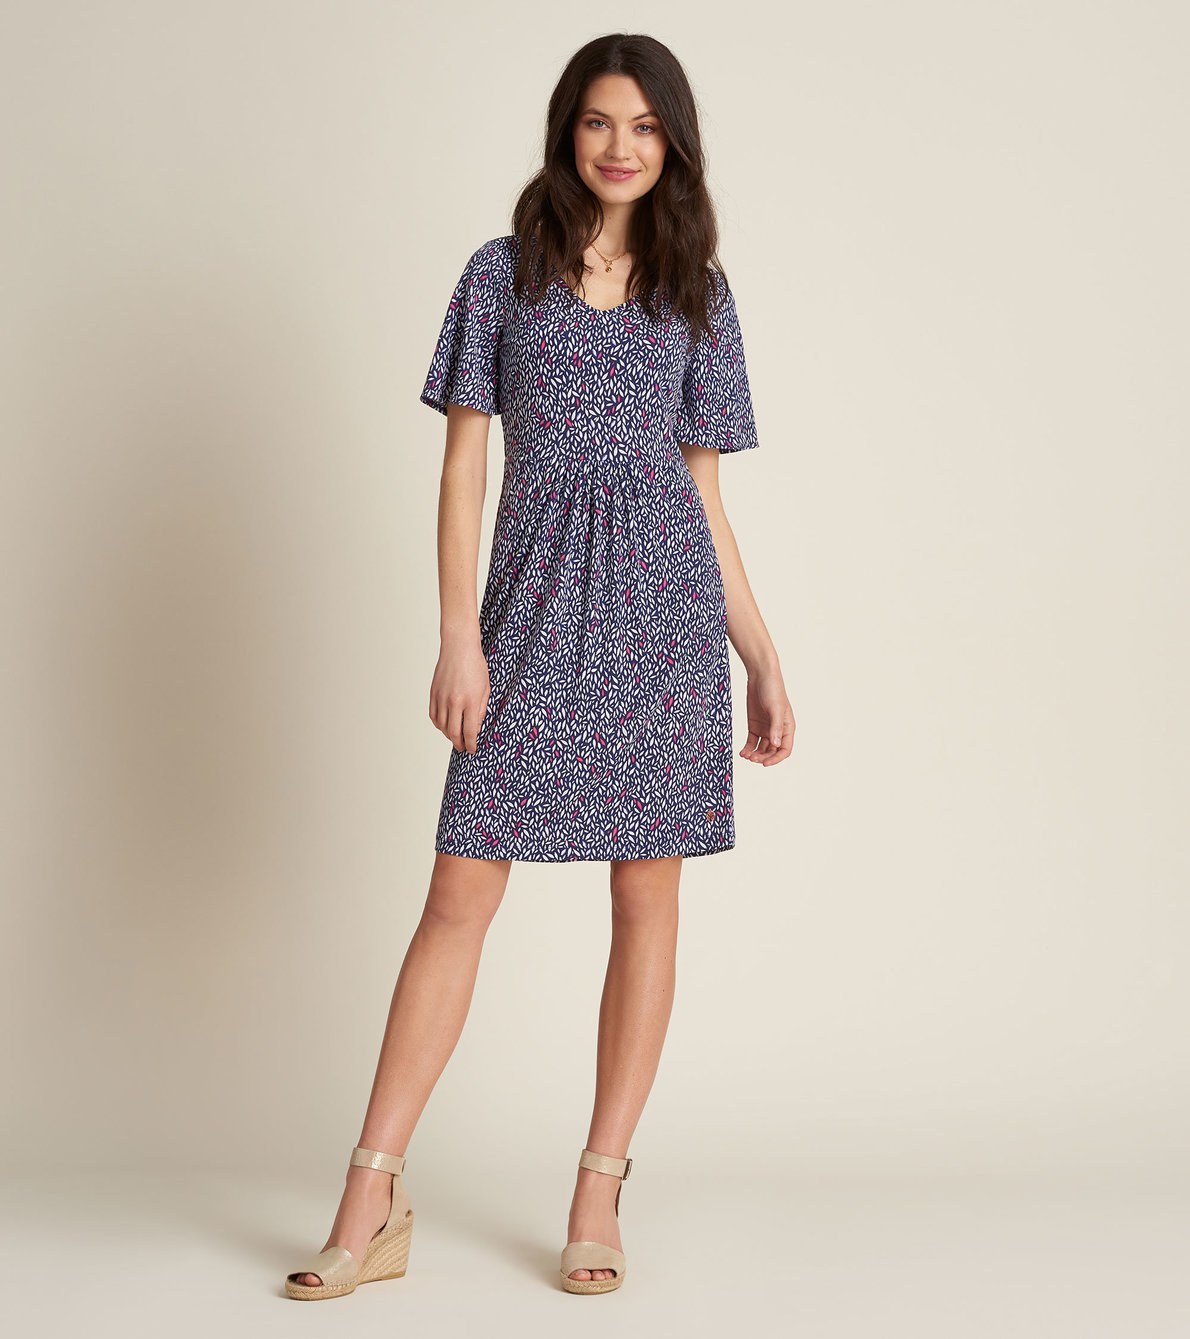 View larger image of Maggie Dress - Diamond Polka Dots